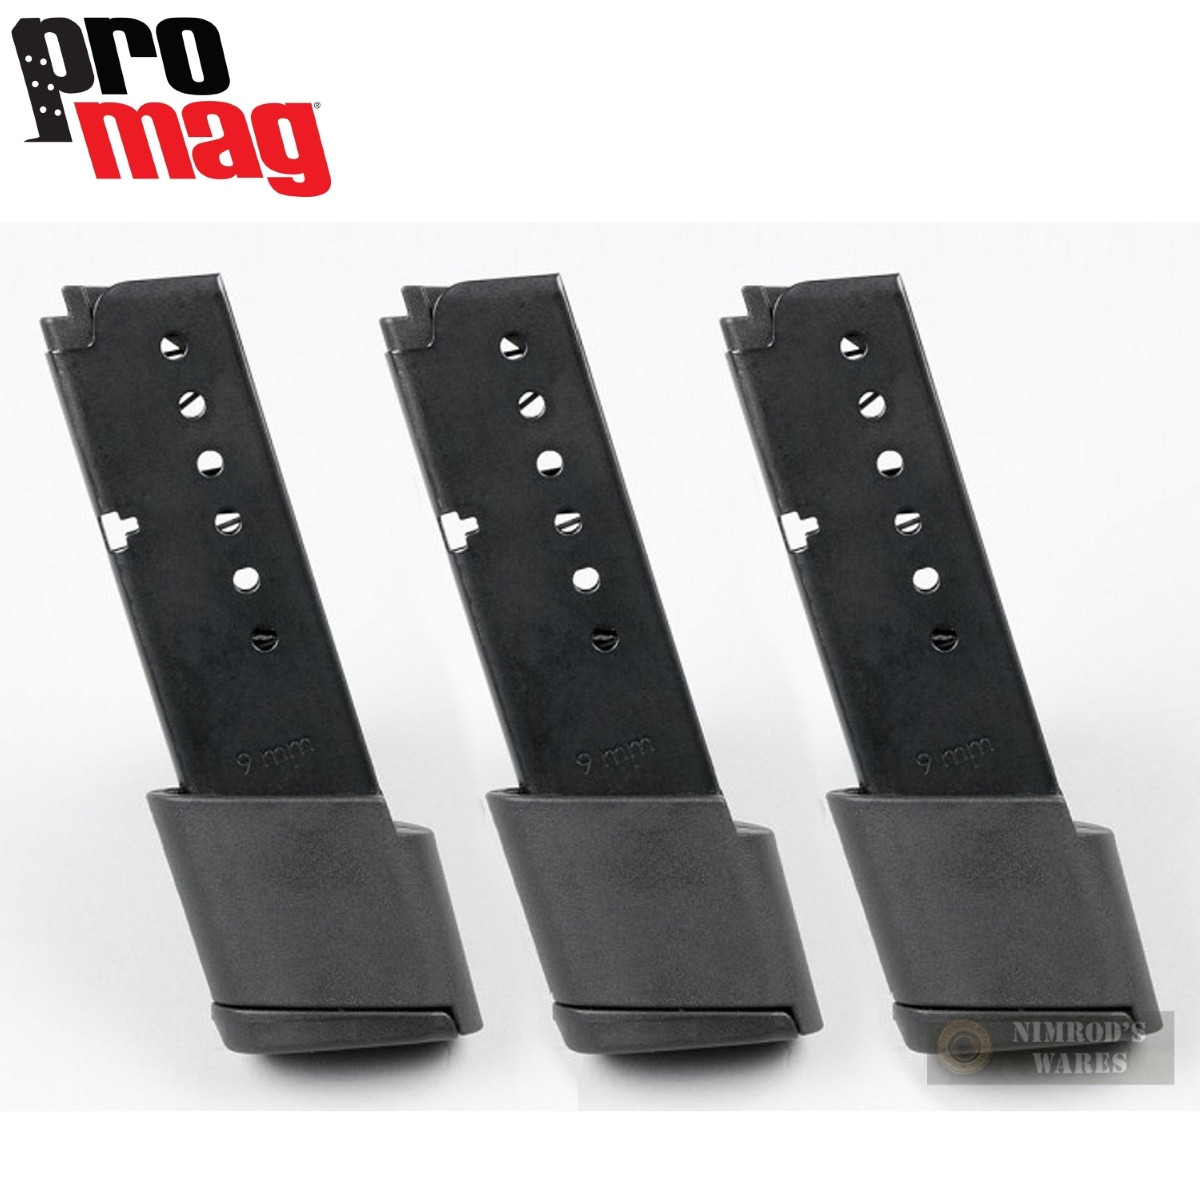 ProMag TAU20 9mm Magazine for sale online 